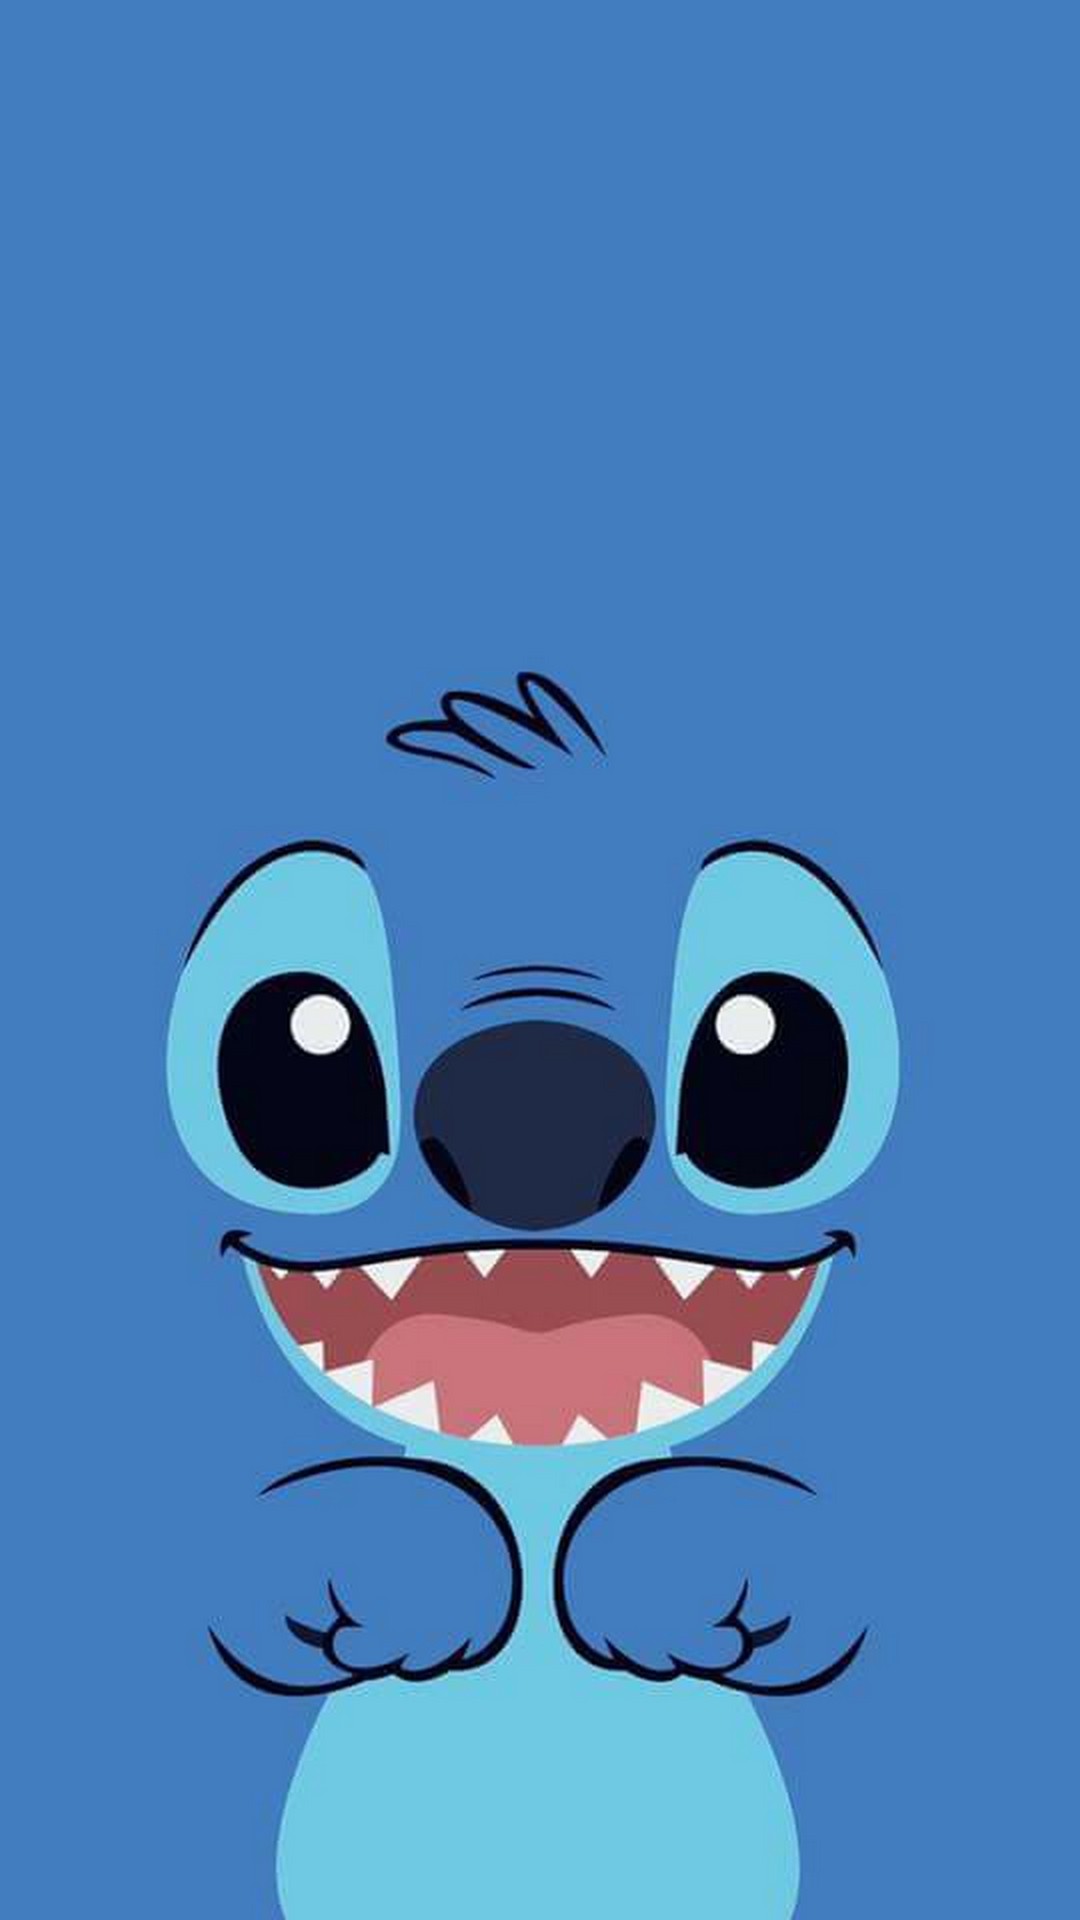 Stitch Disney Wallpaper For Mobile Android Resolution 1080x1920